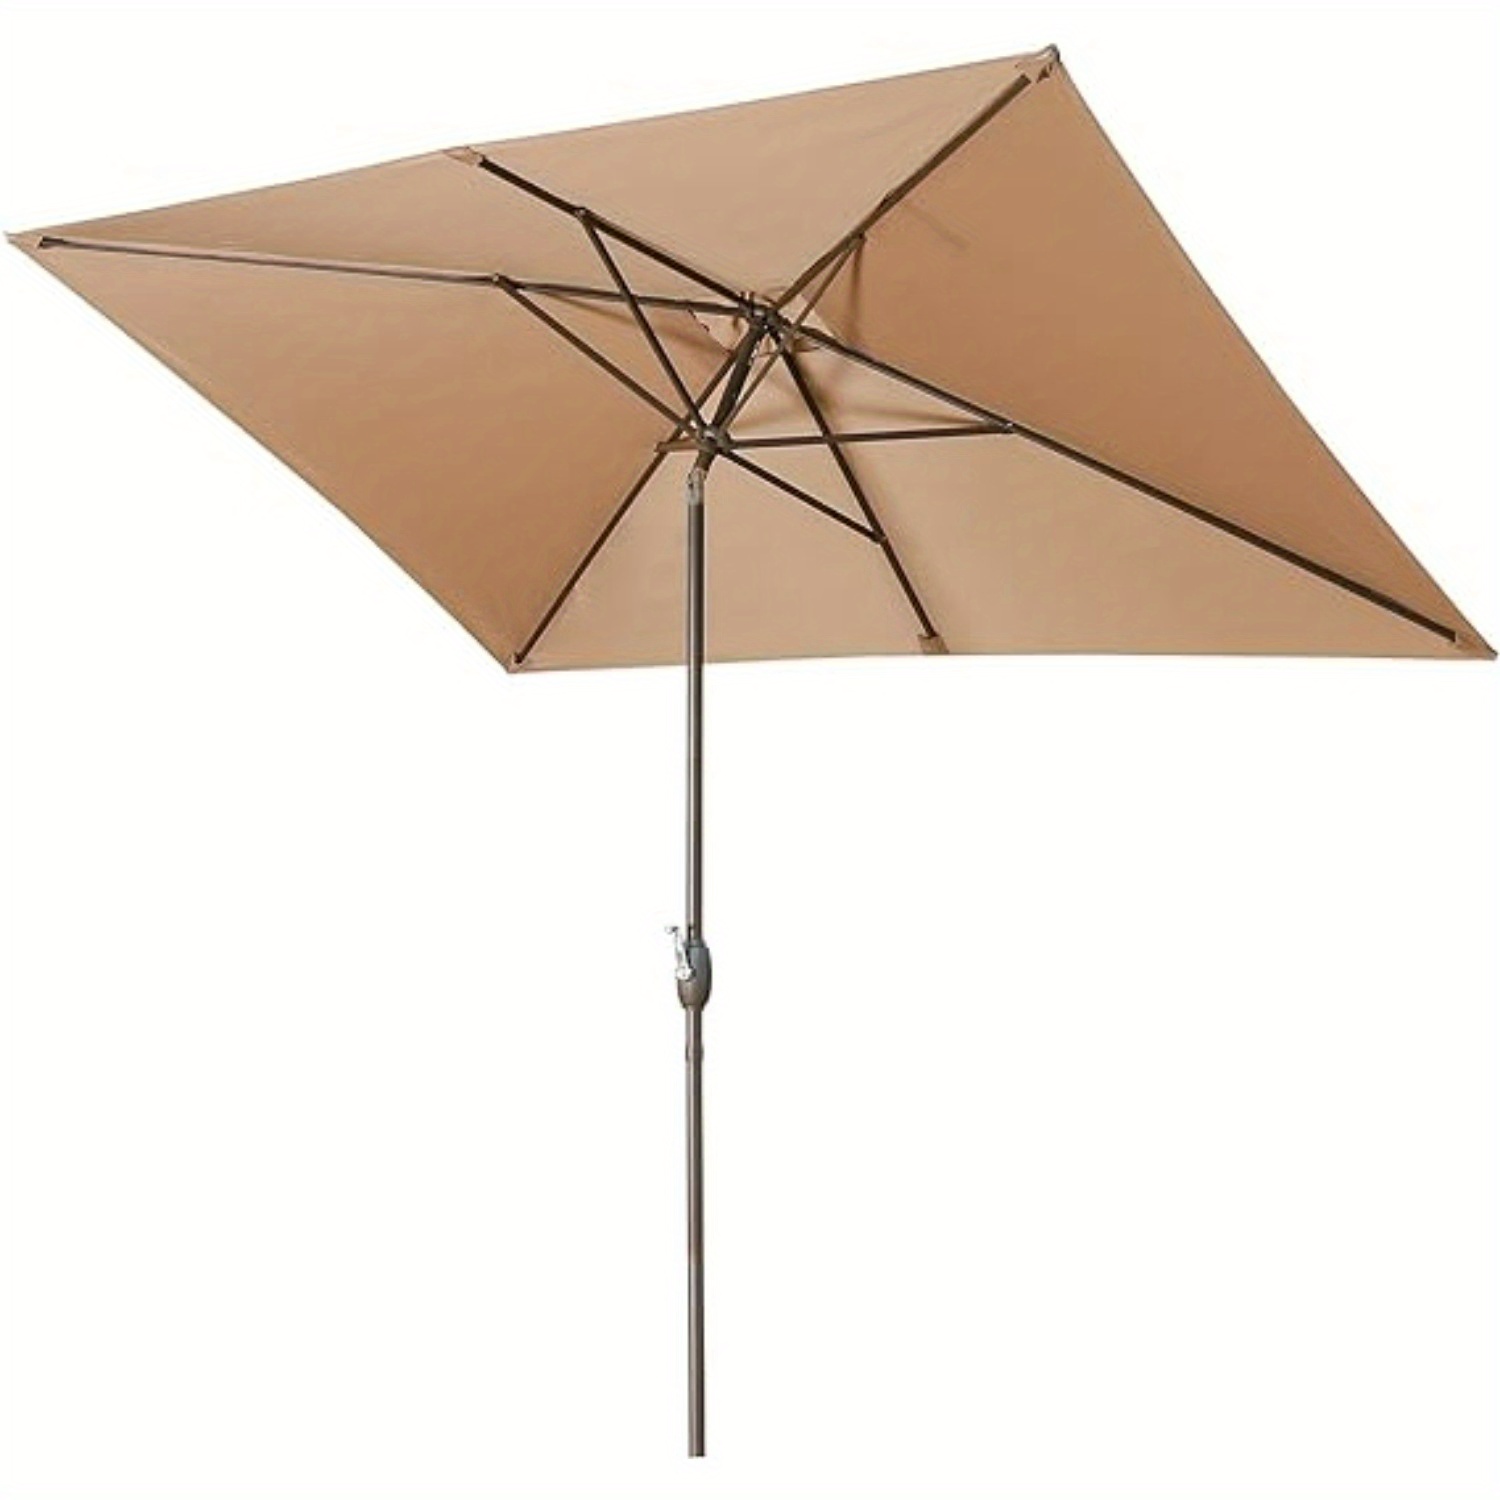 

6.5ft × 10ft Outdoor Patio Umbrellas For Deck, Lawn, Pool& Backyard